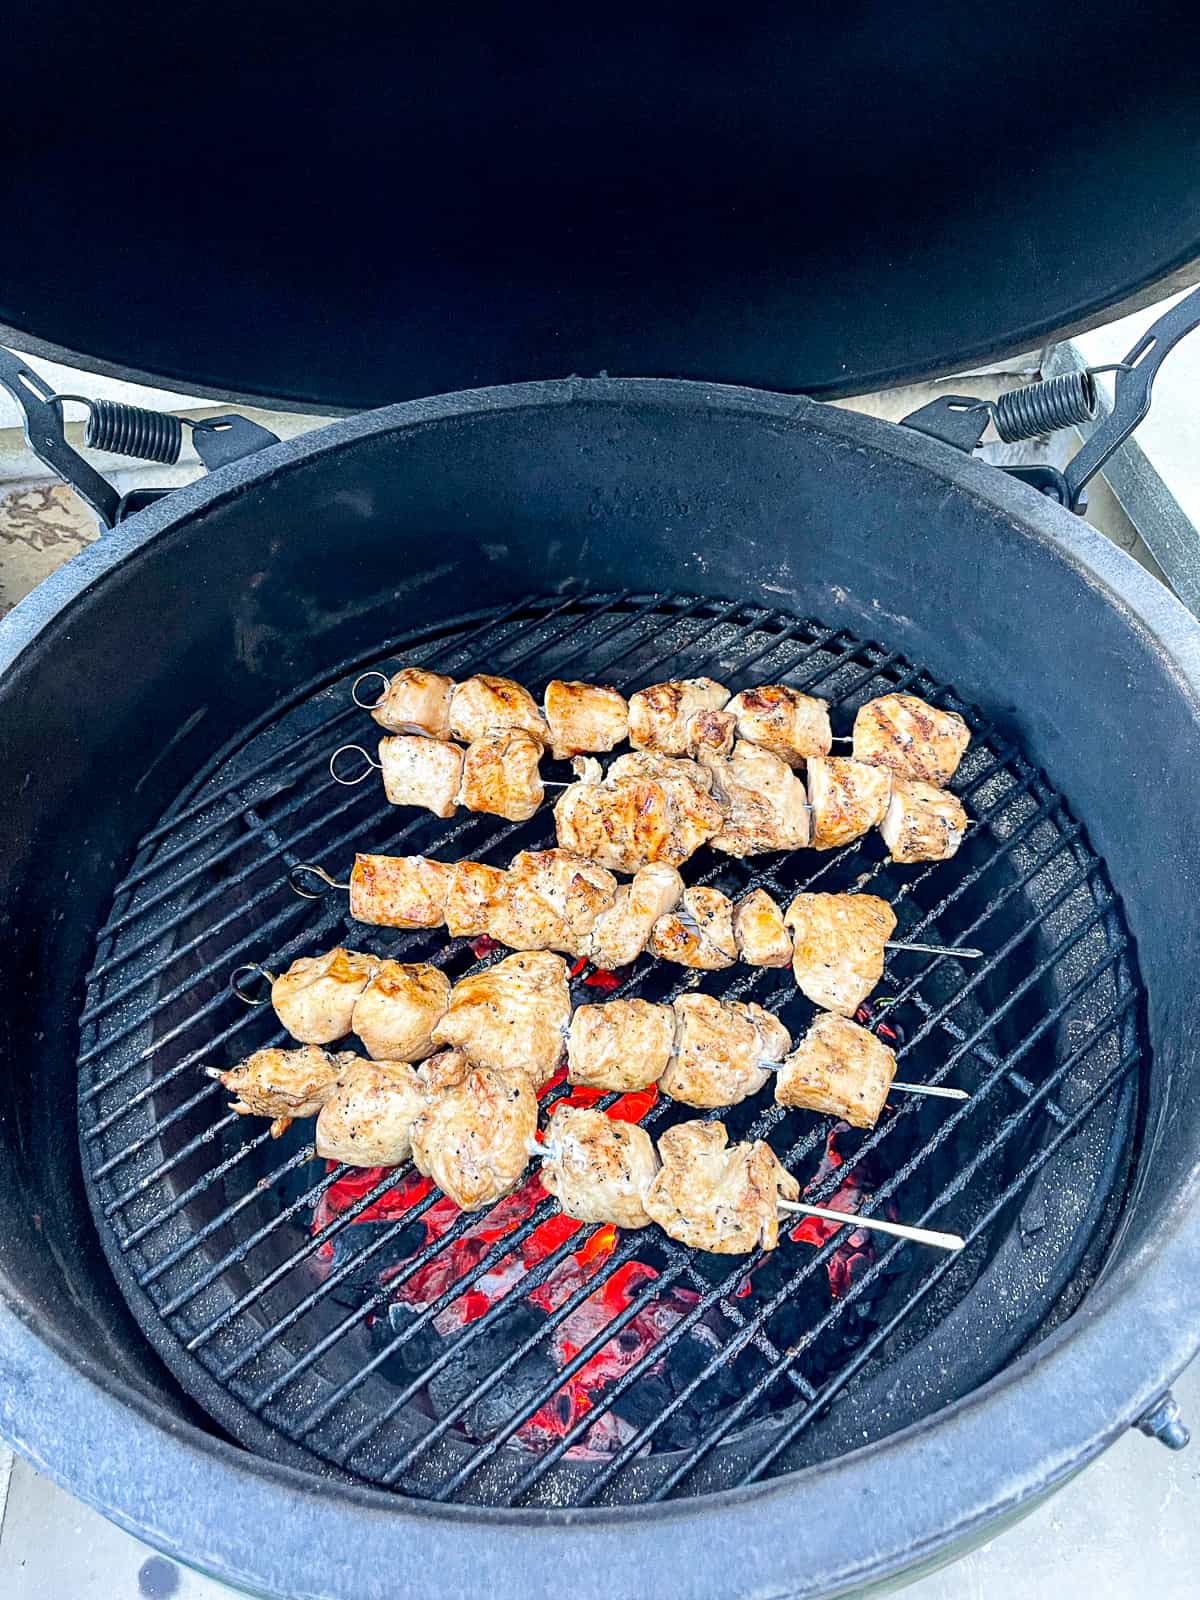 Some grilled chicken skewers on the big green egg.